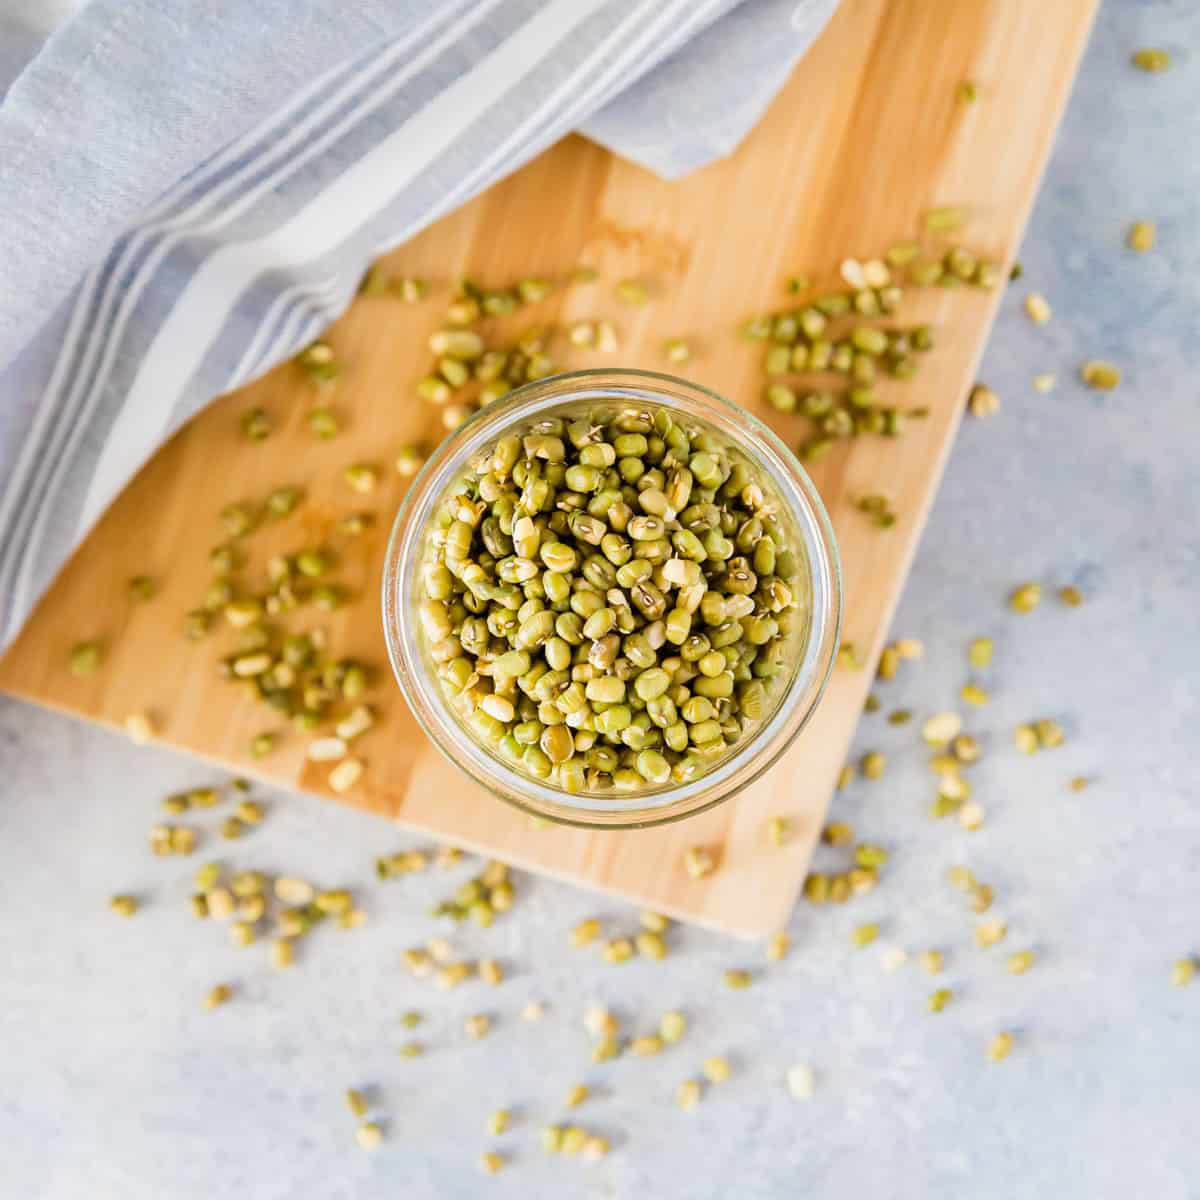 Sprouted organic dry mung beans in a glass jar.